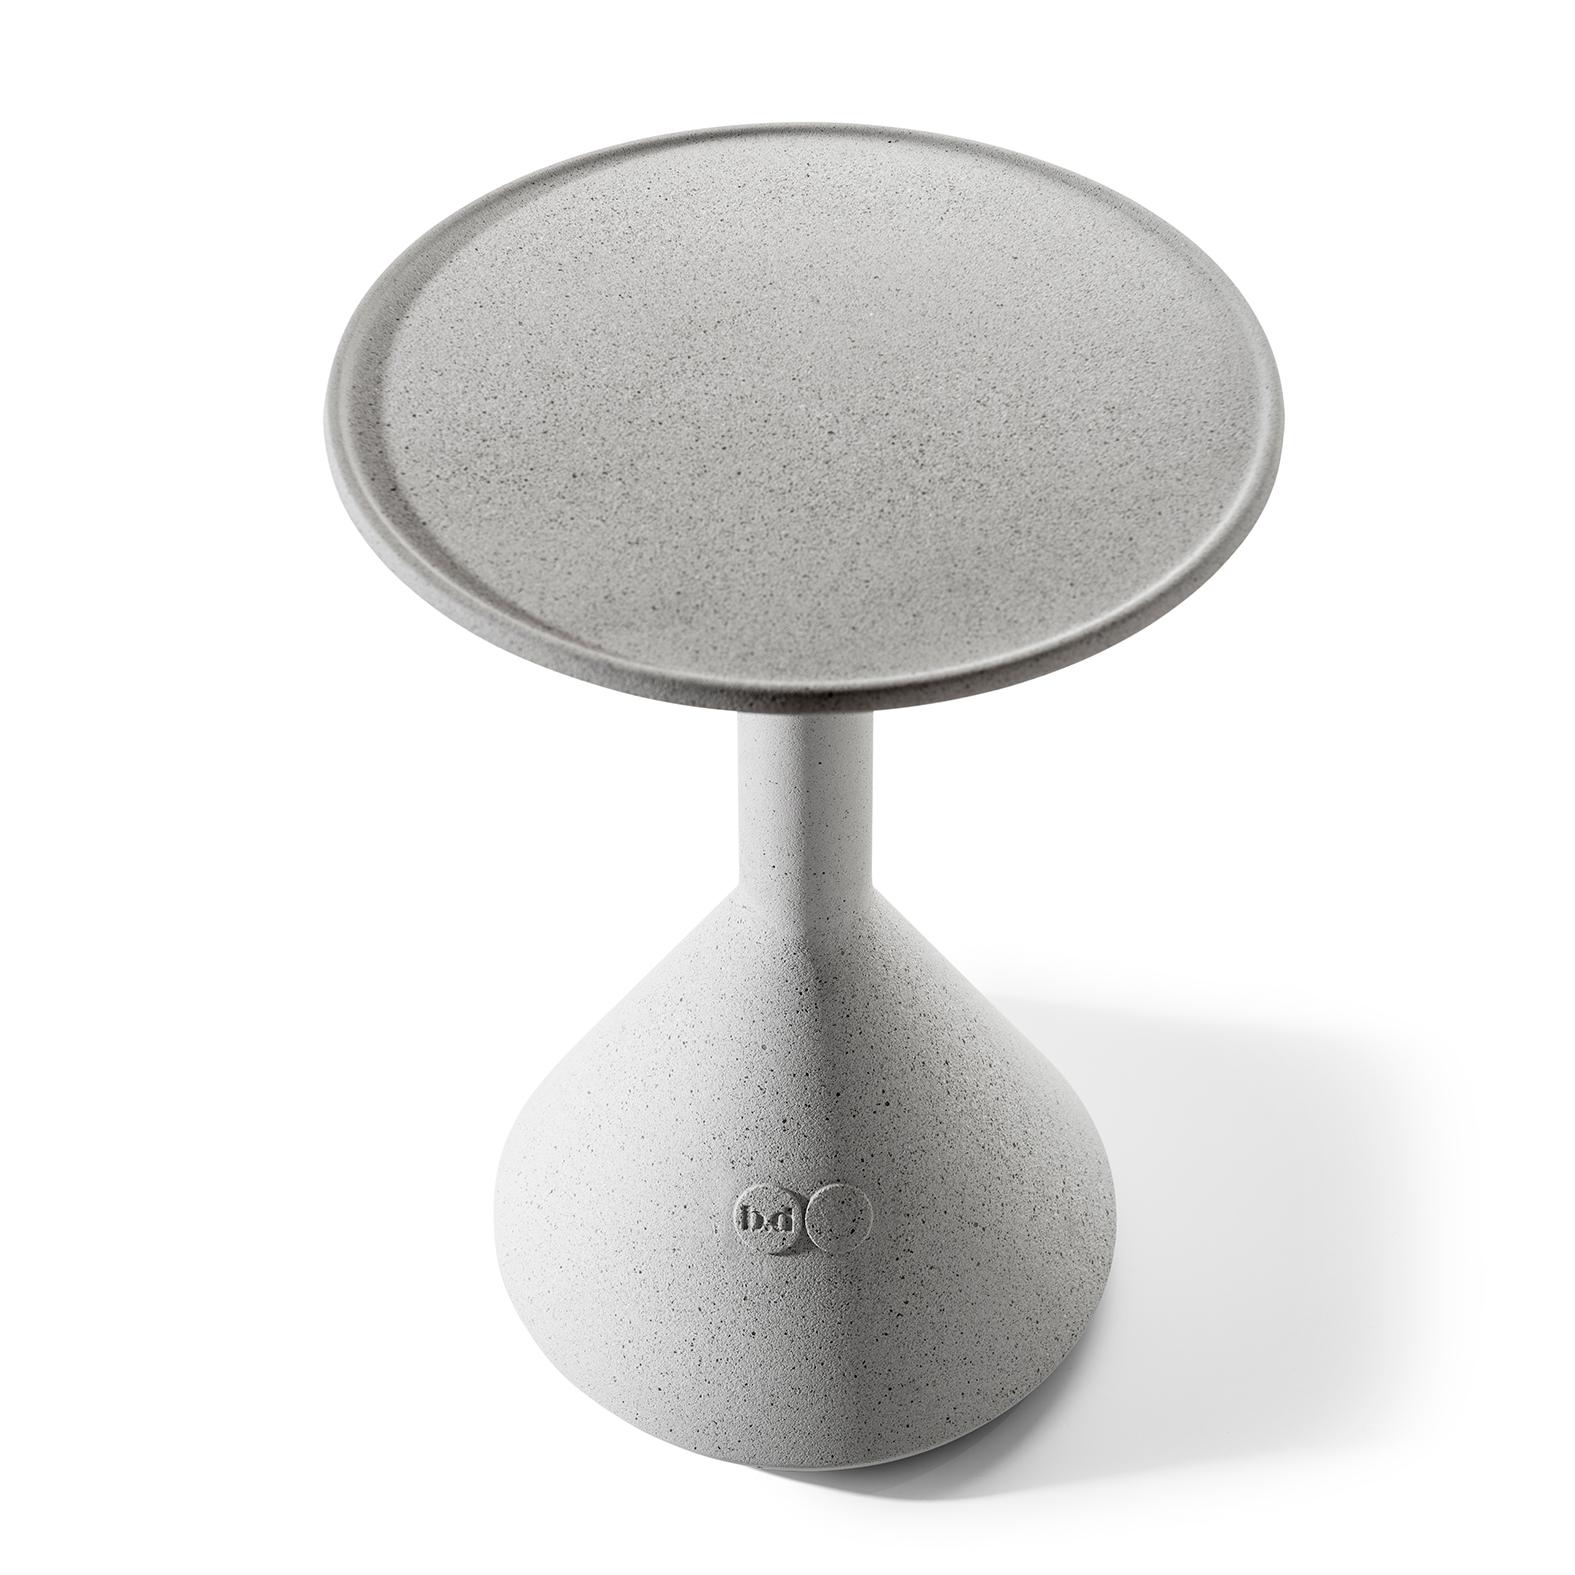 Side table designed by Konstantin Grcic made by BD Barcelona.

A solid architectural piece in grey concrete, designed by Konstantin Grcic 
Incorporated with regulatory glides.

Measures: 40 diameter x 51 height cm.

 